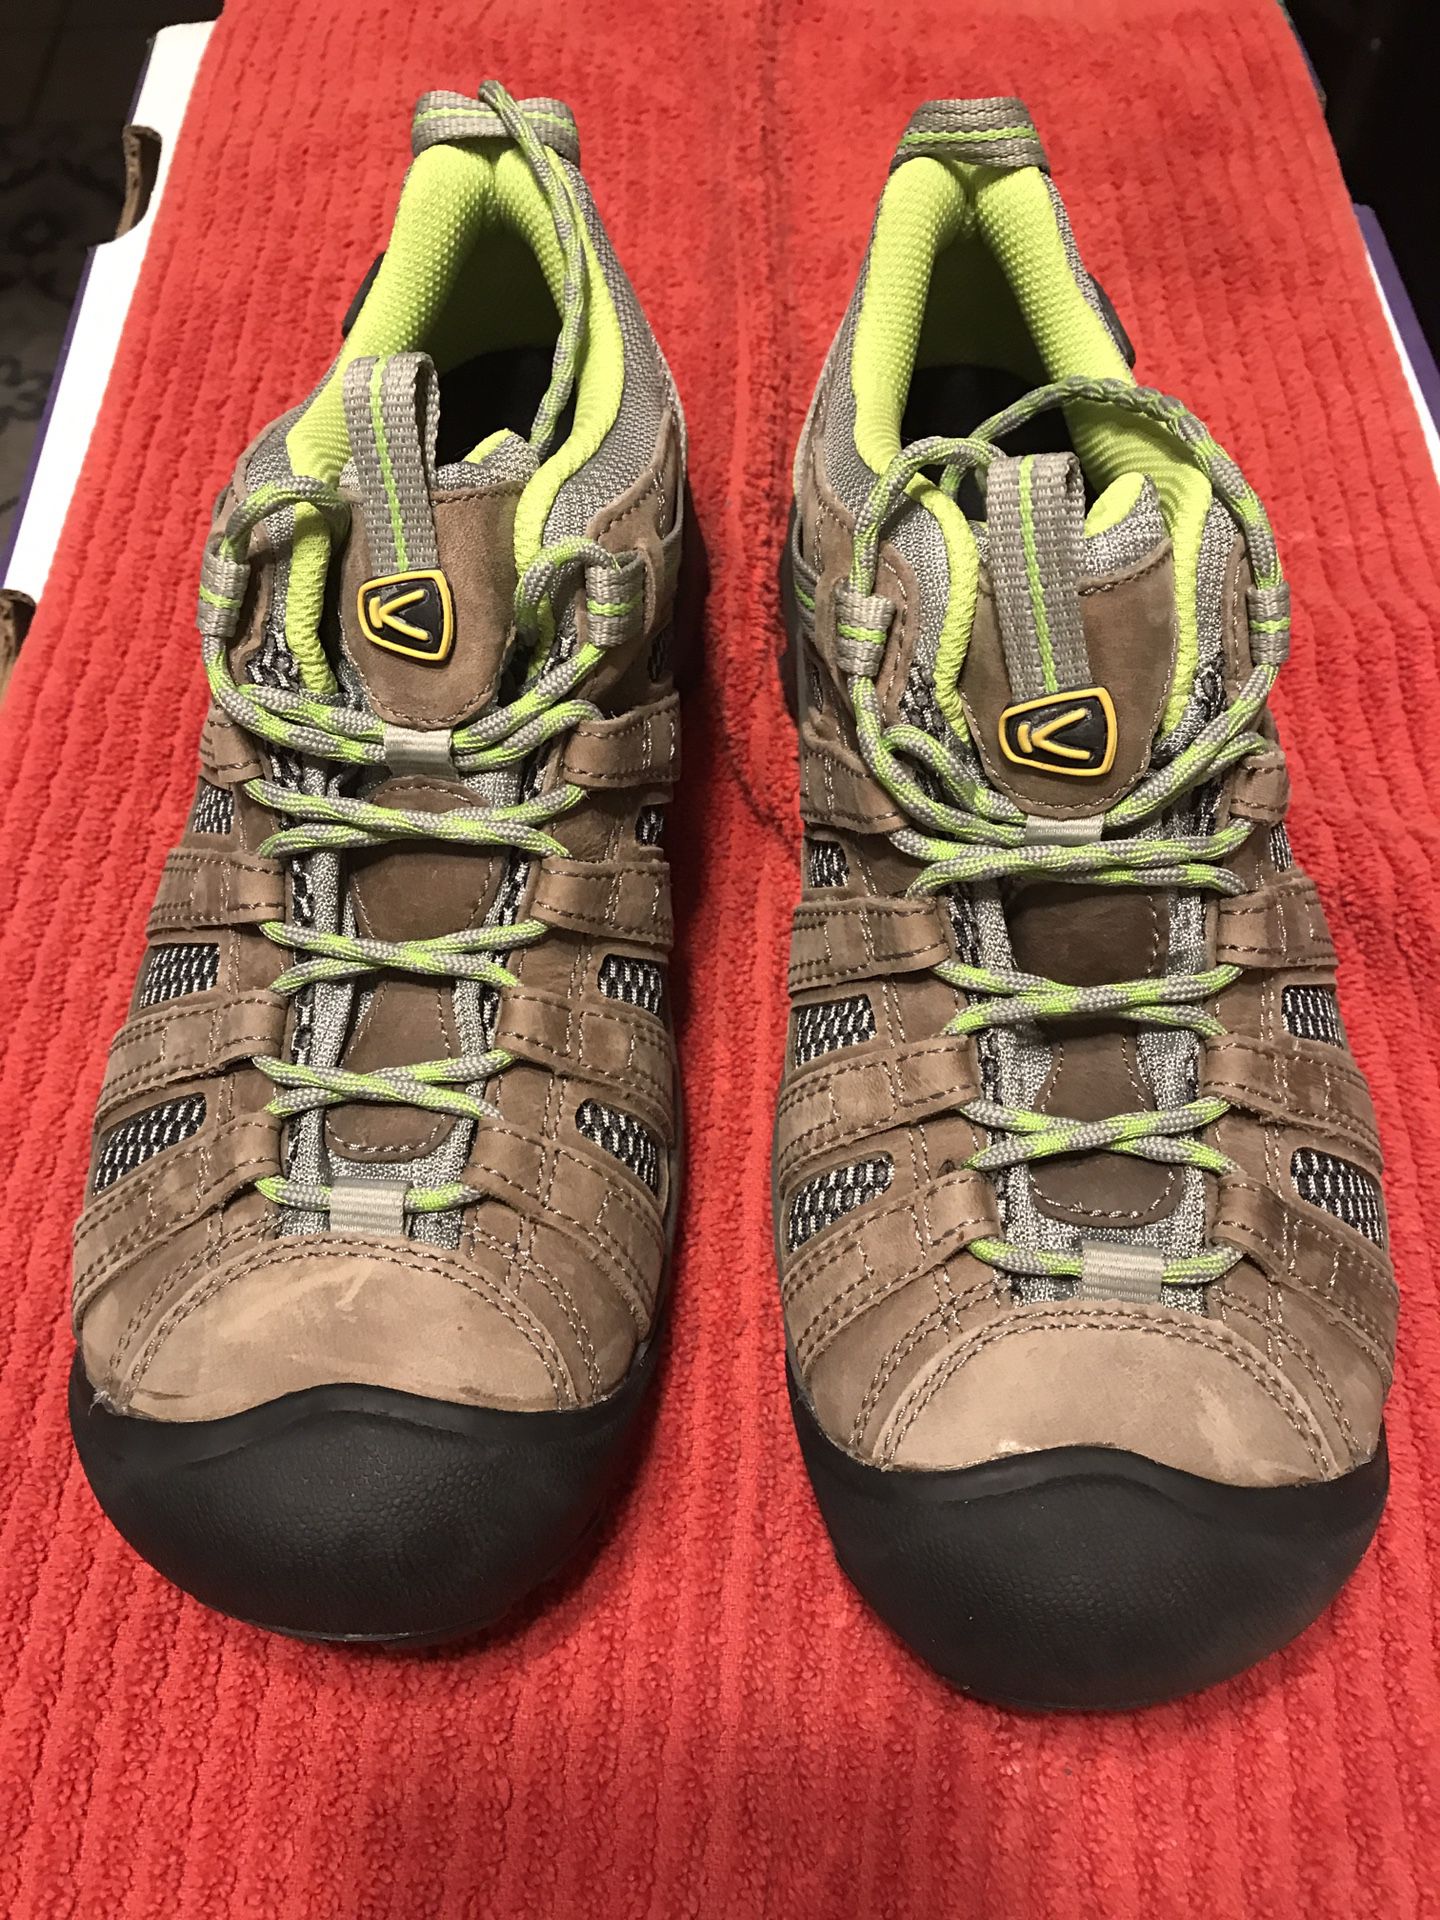 Womens Keen Shoes Brand New